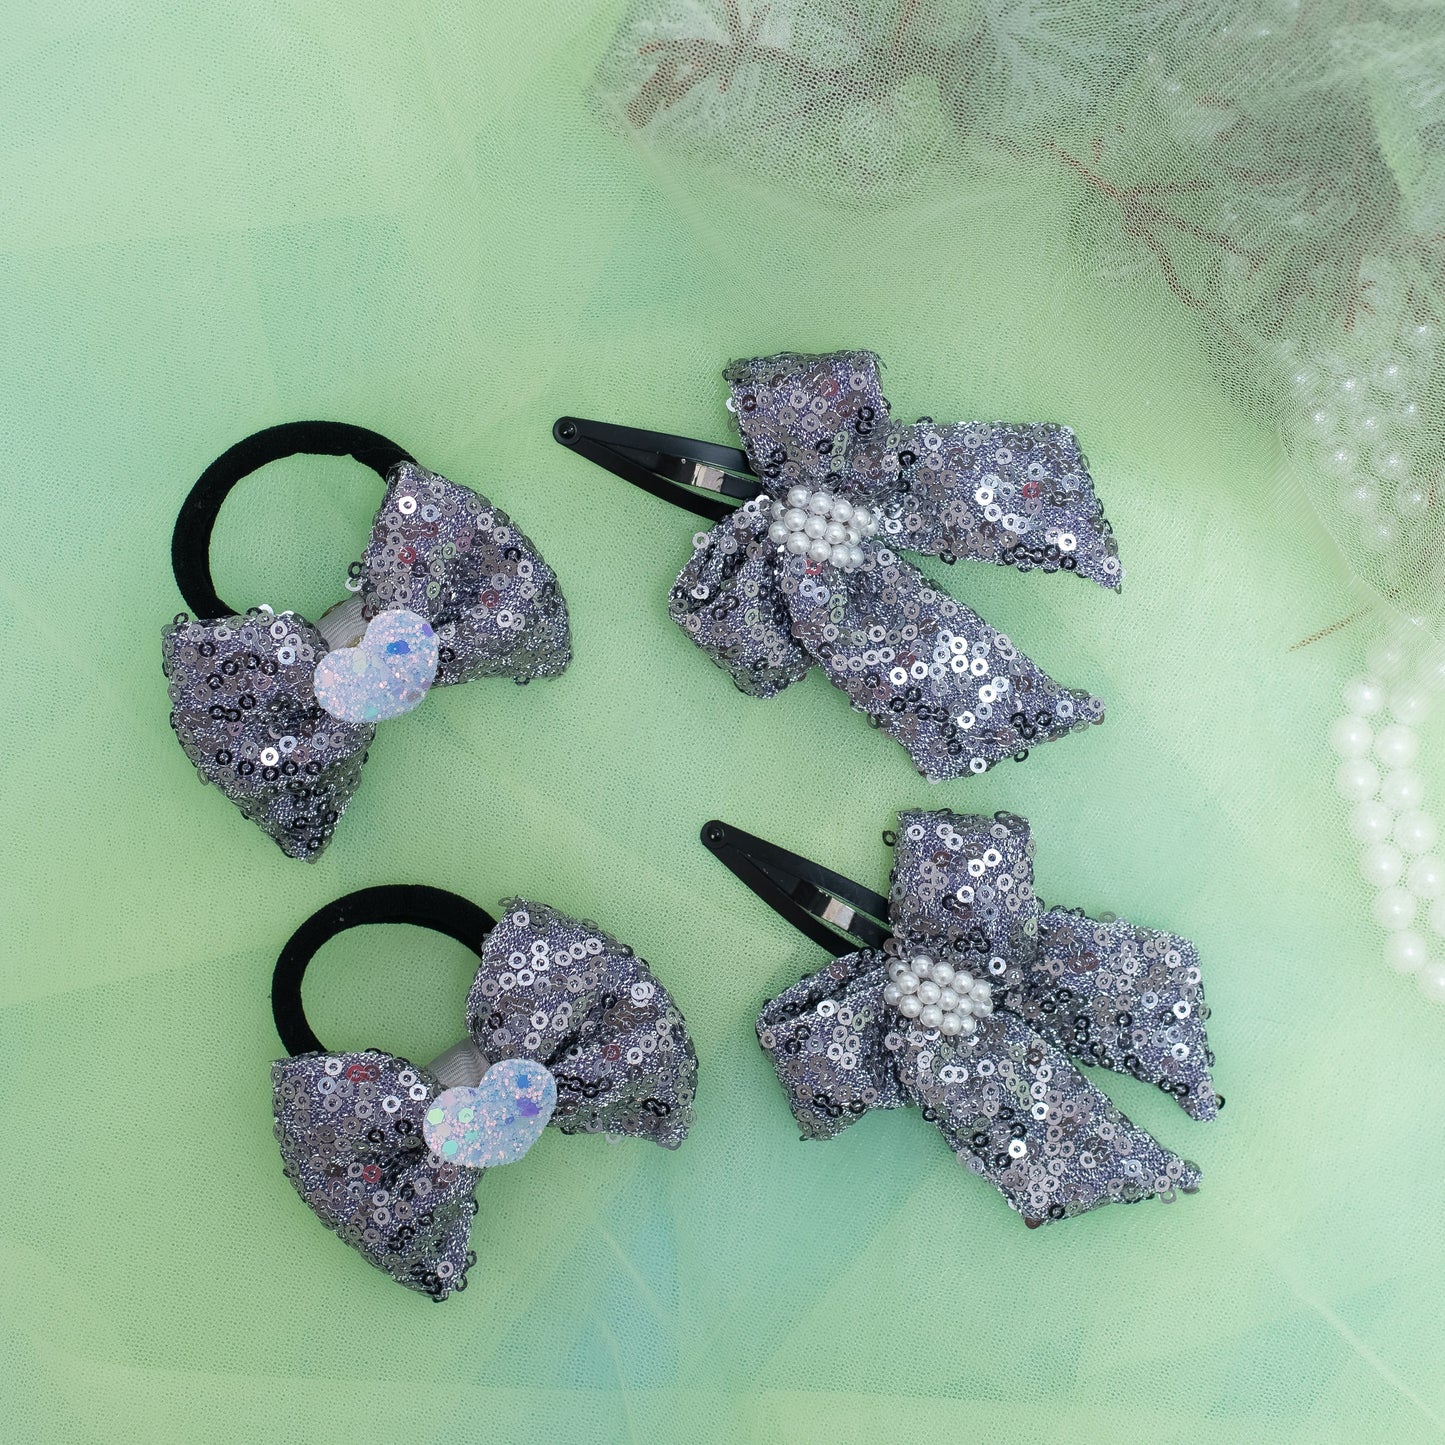 Combo: Sequined bow on Tic-Tac Pins and Rubberbands - Grey (Set of 1 pair Tic-tac clips and 1 pair Hair-ties = 4 quantity)